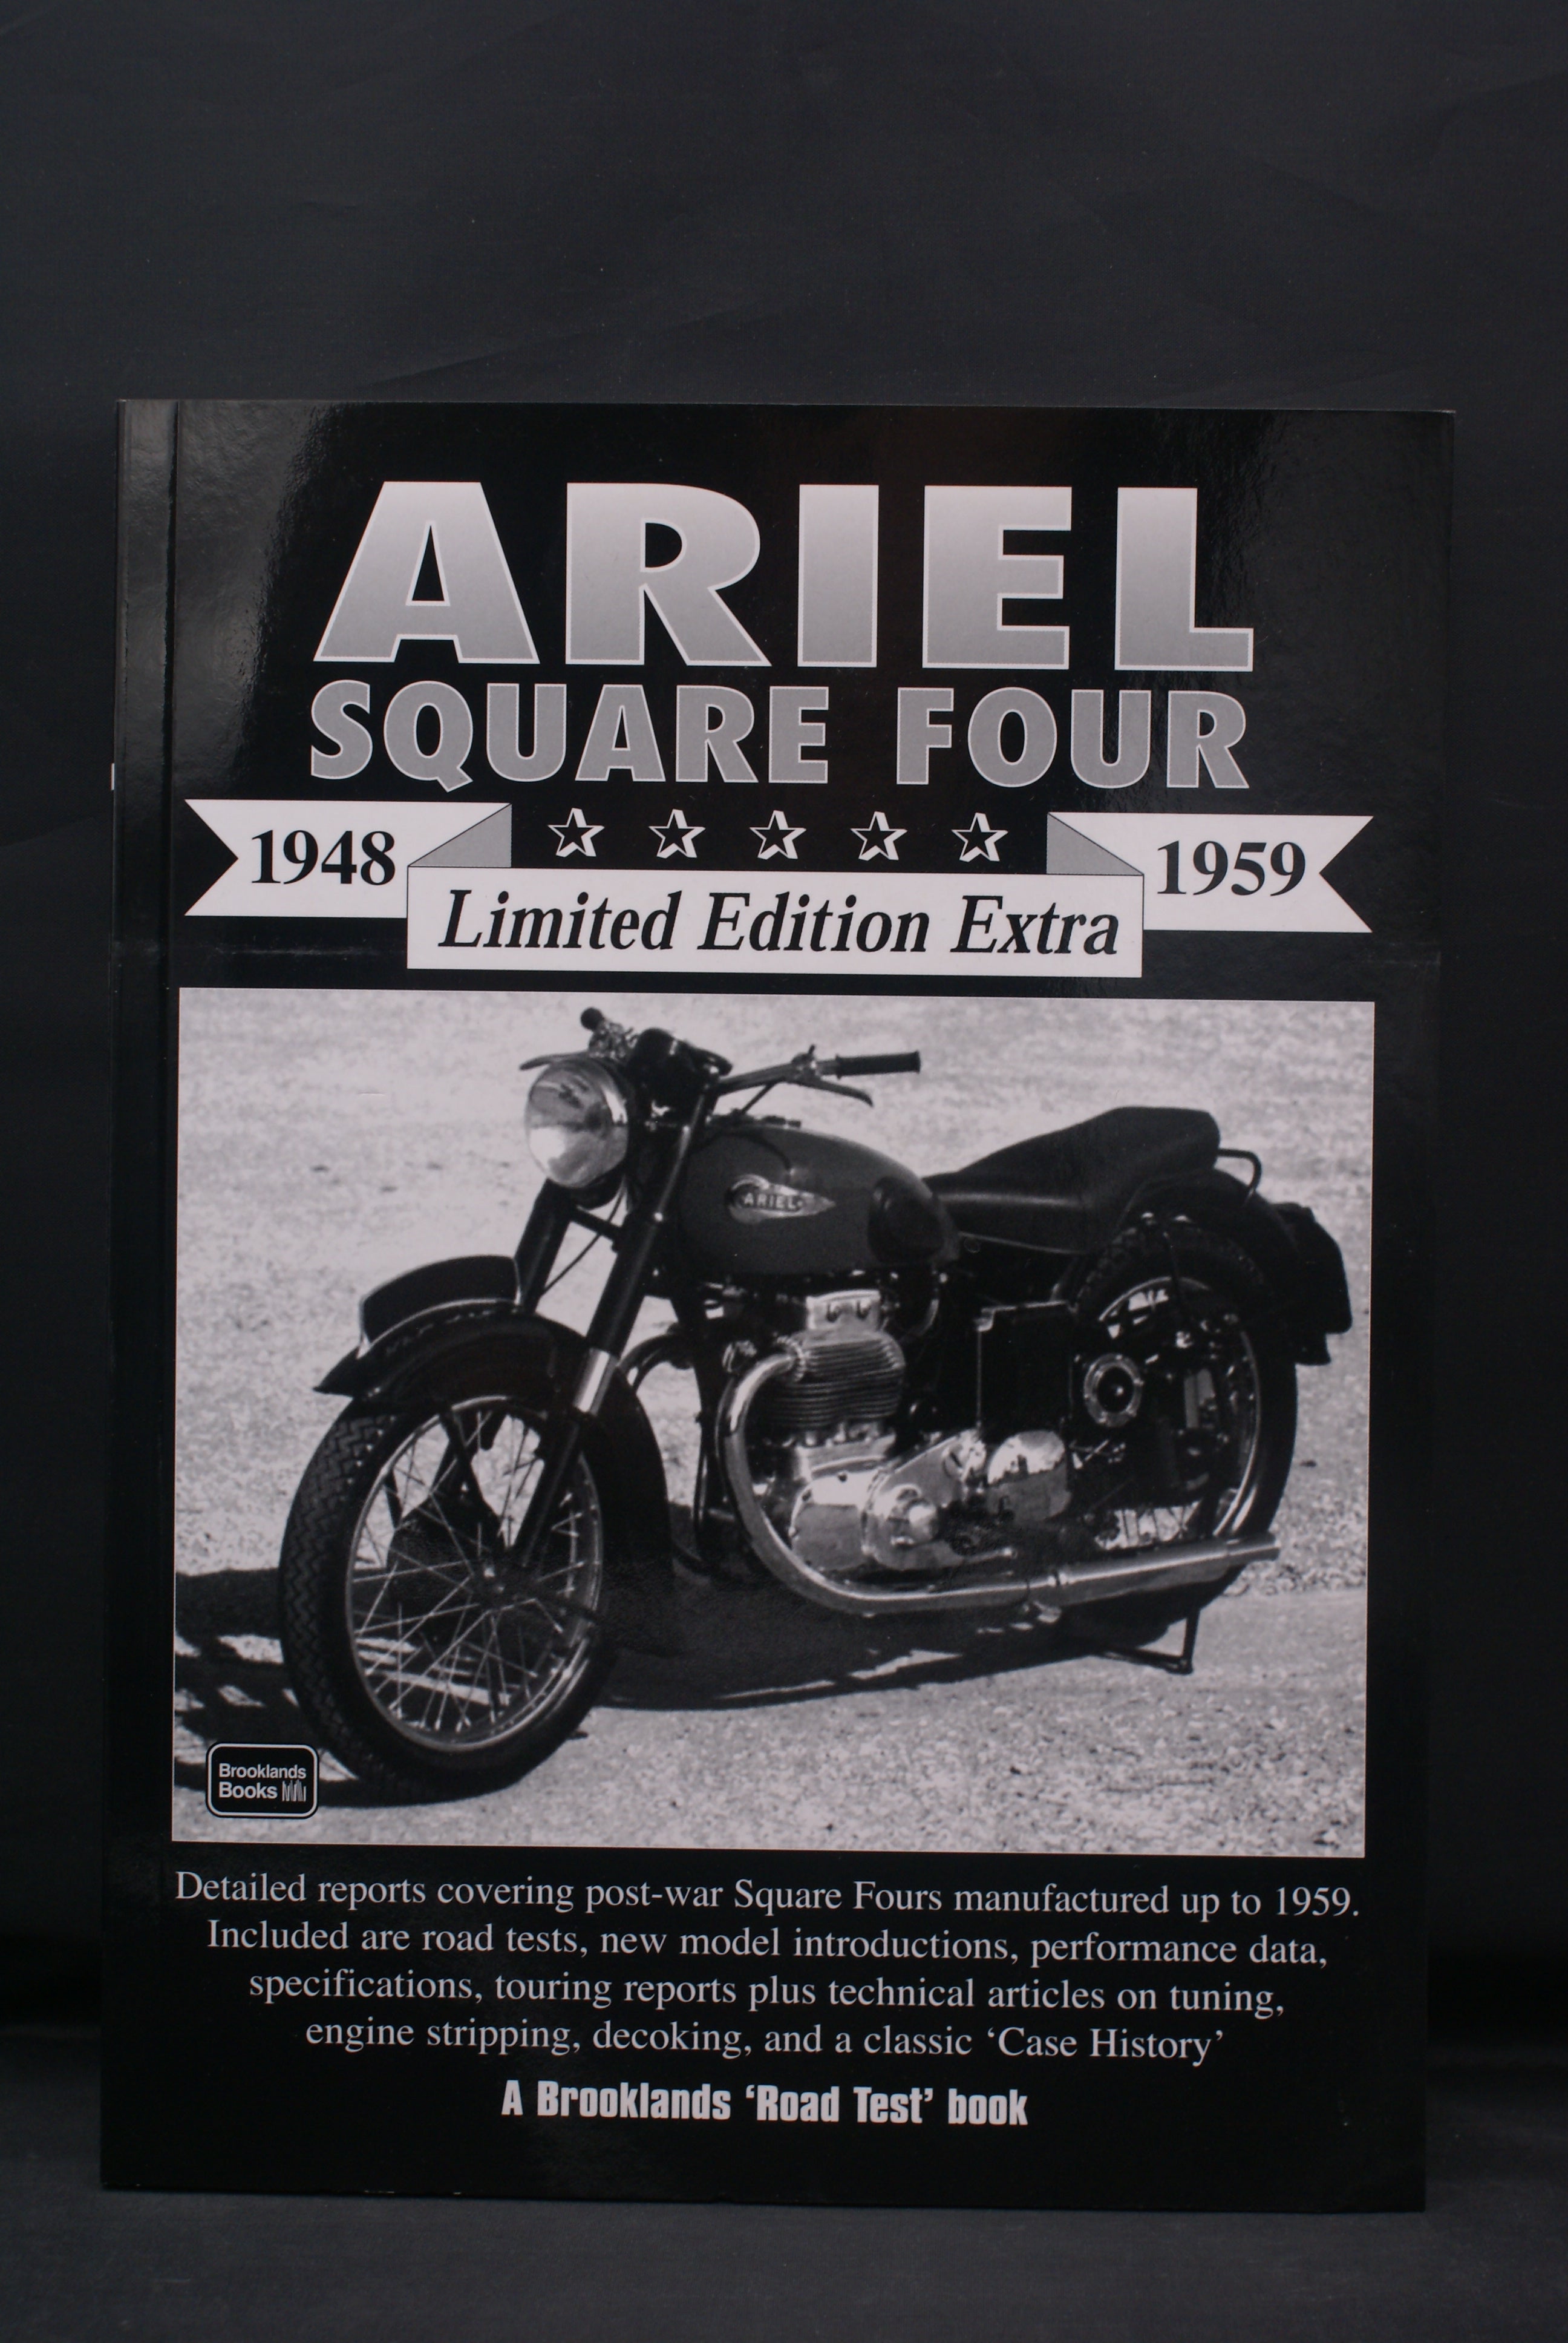 Ariel, Square Four, Limited Edition Extra